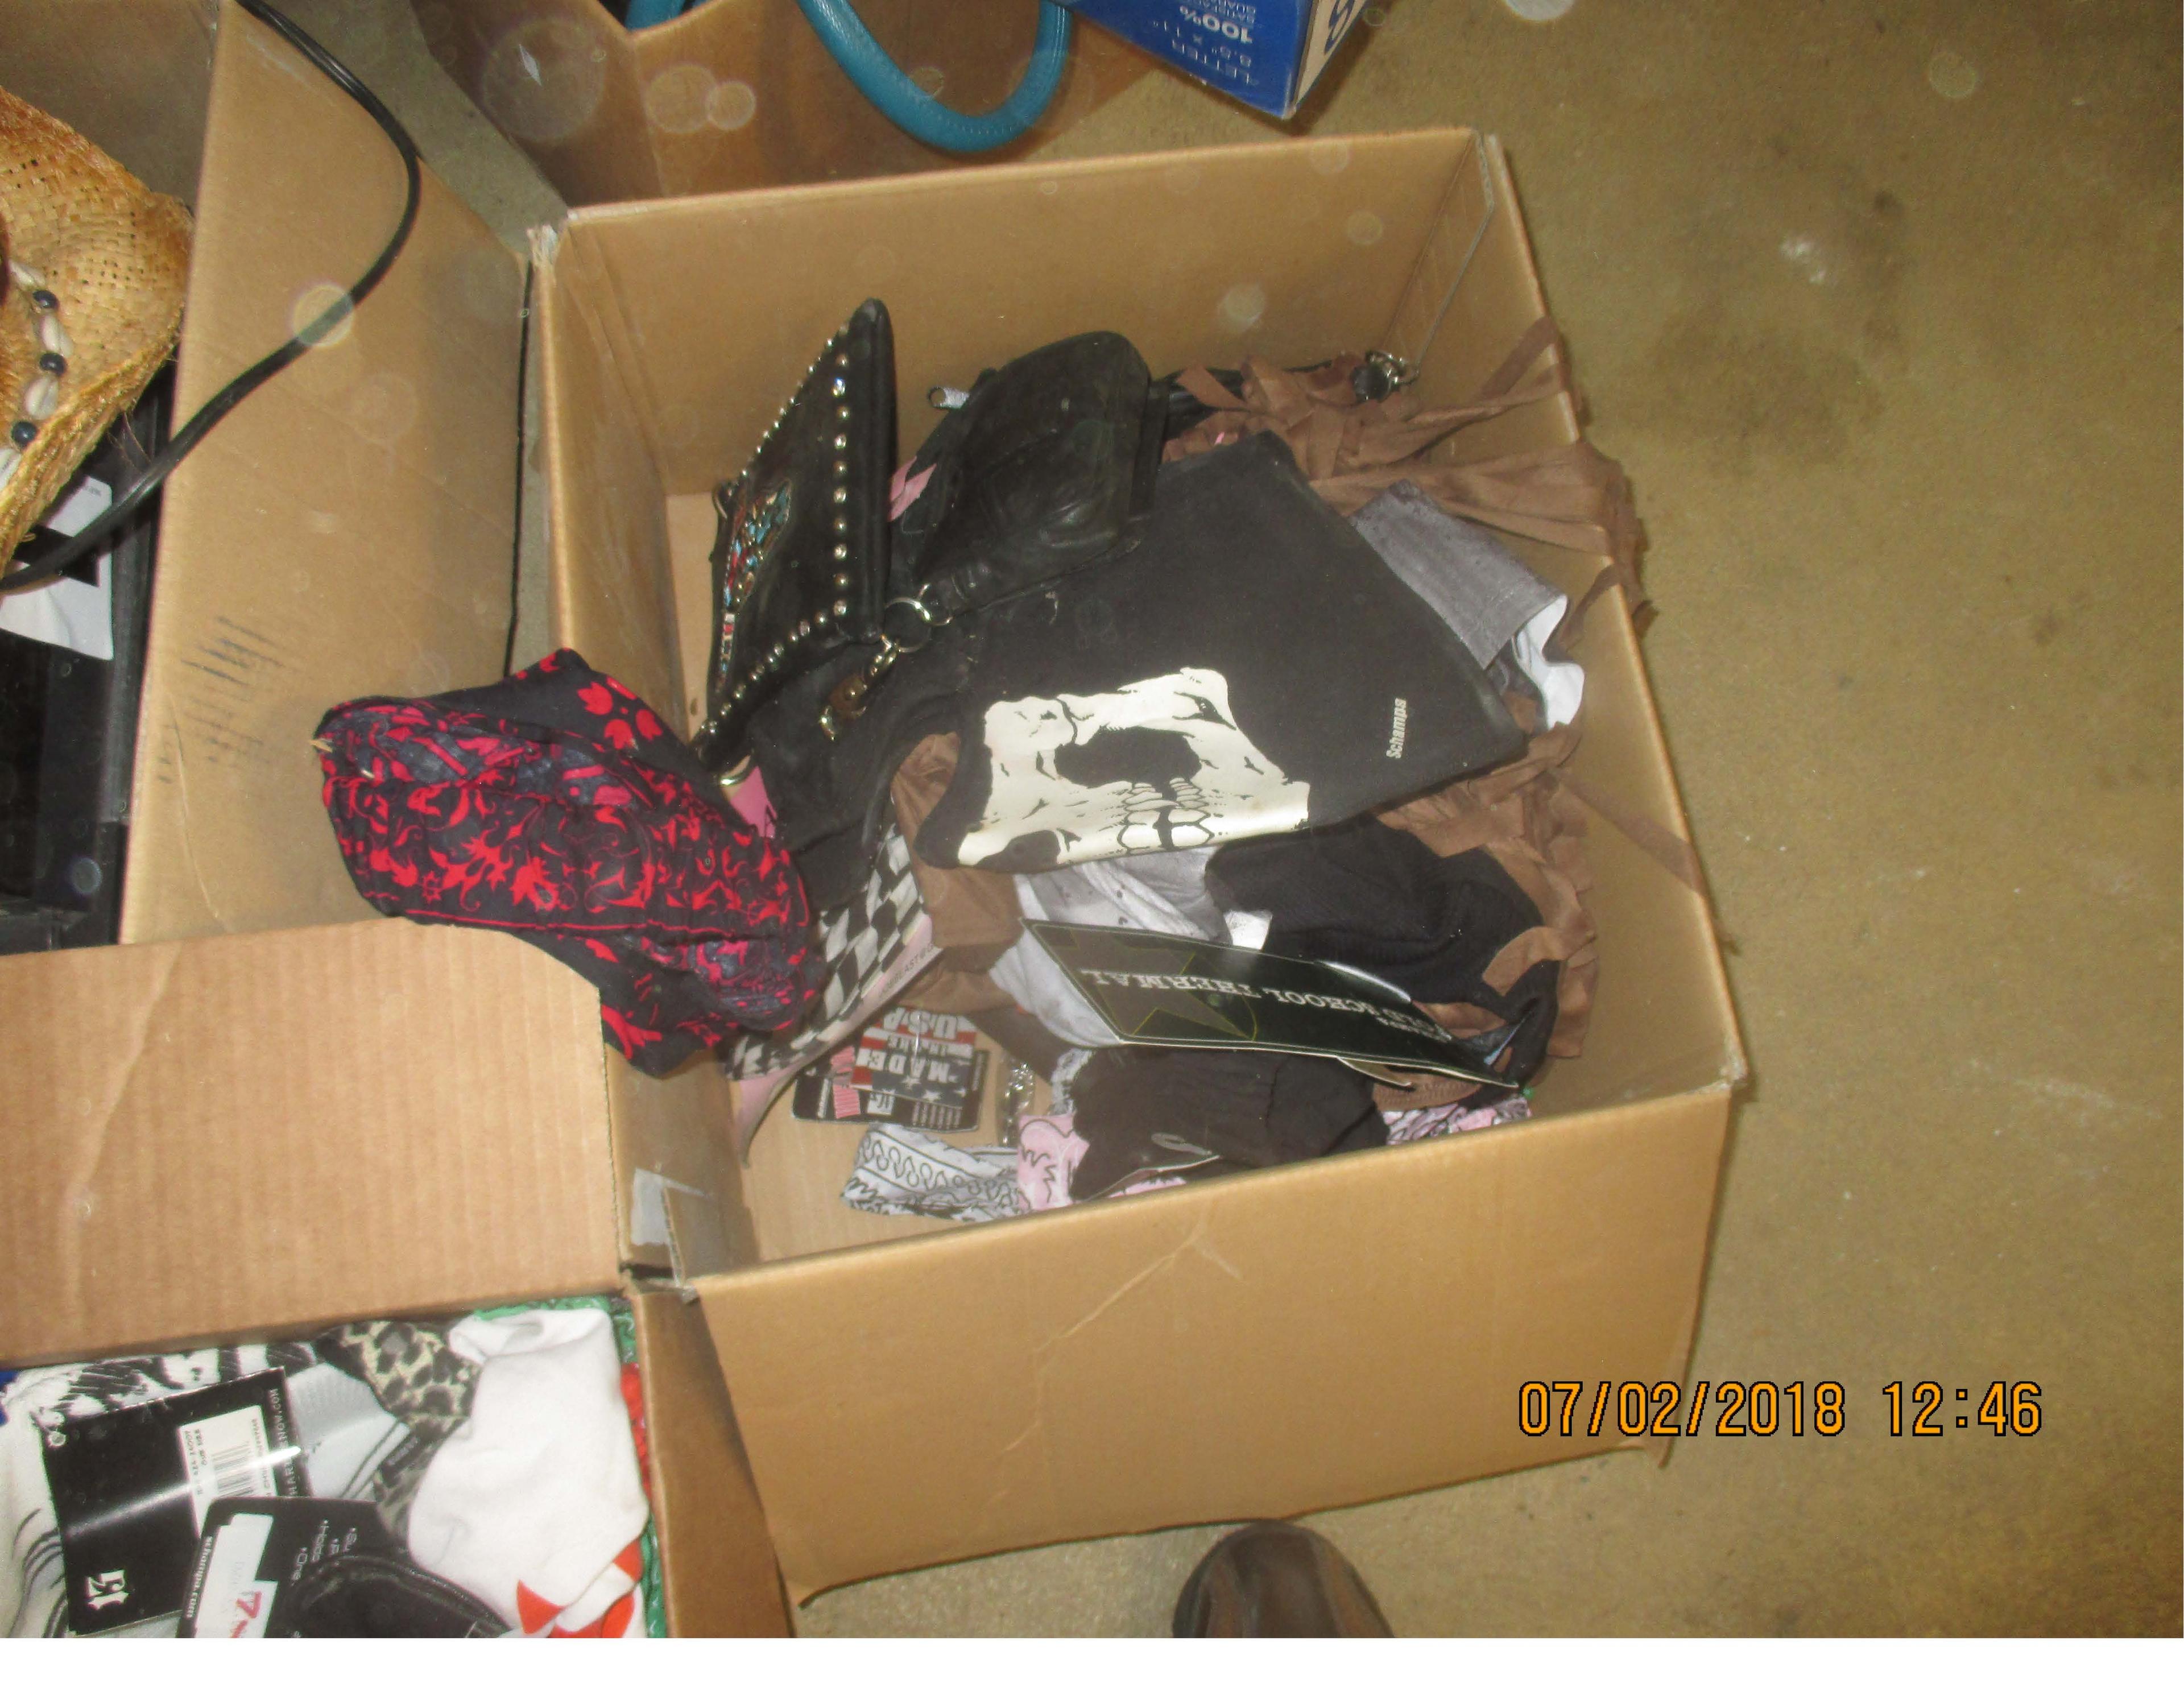 Insurance Claim: Clothing, hats, leather bags, etc